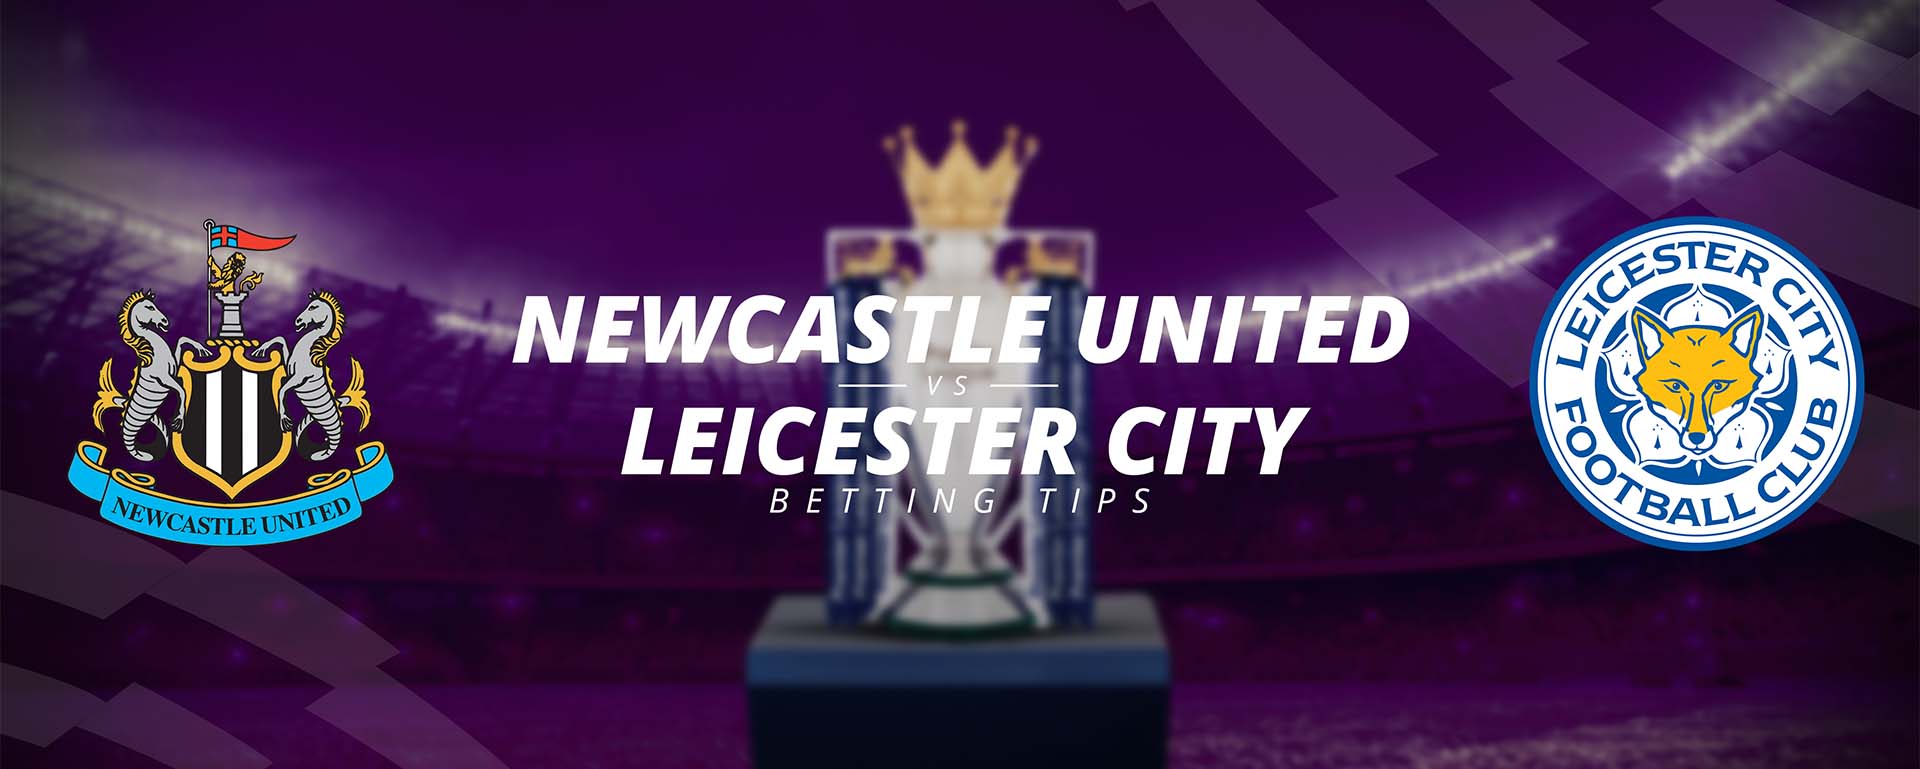 NEWCASTLE VS LEICESTER CITY: BETTING TIPS